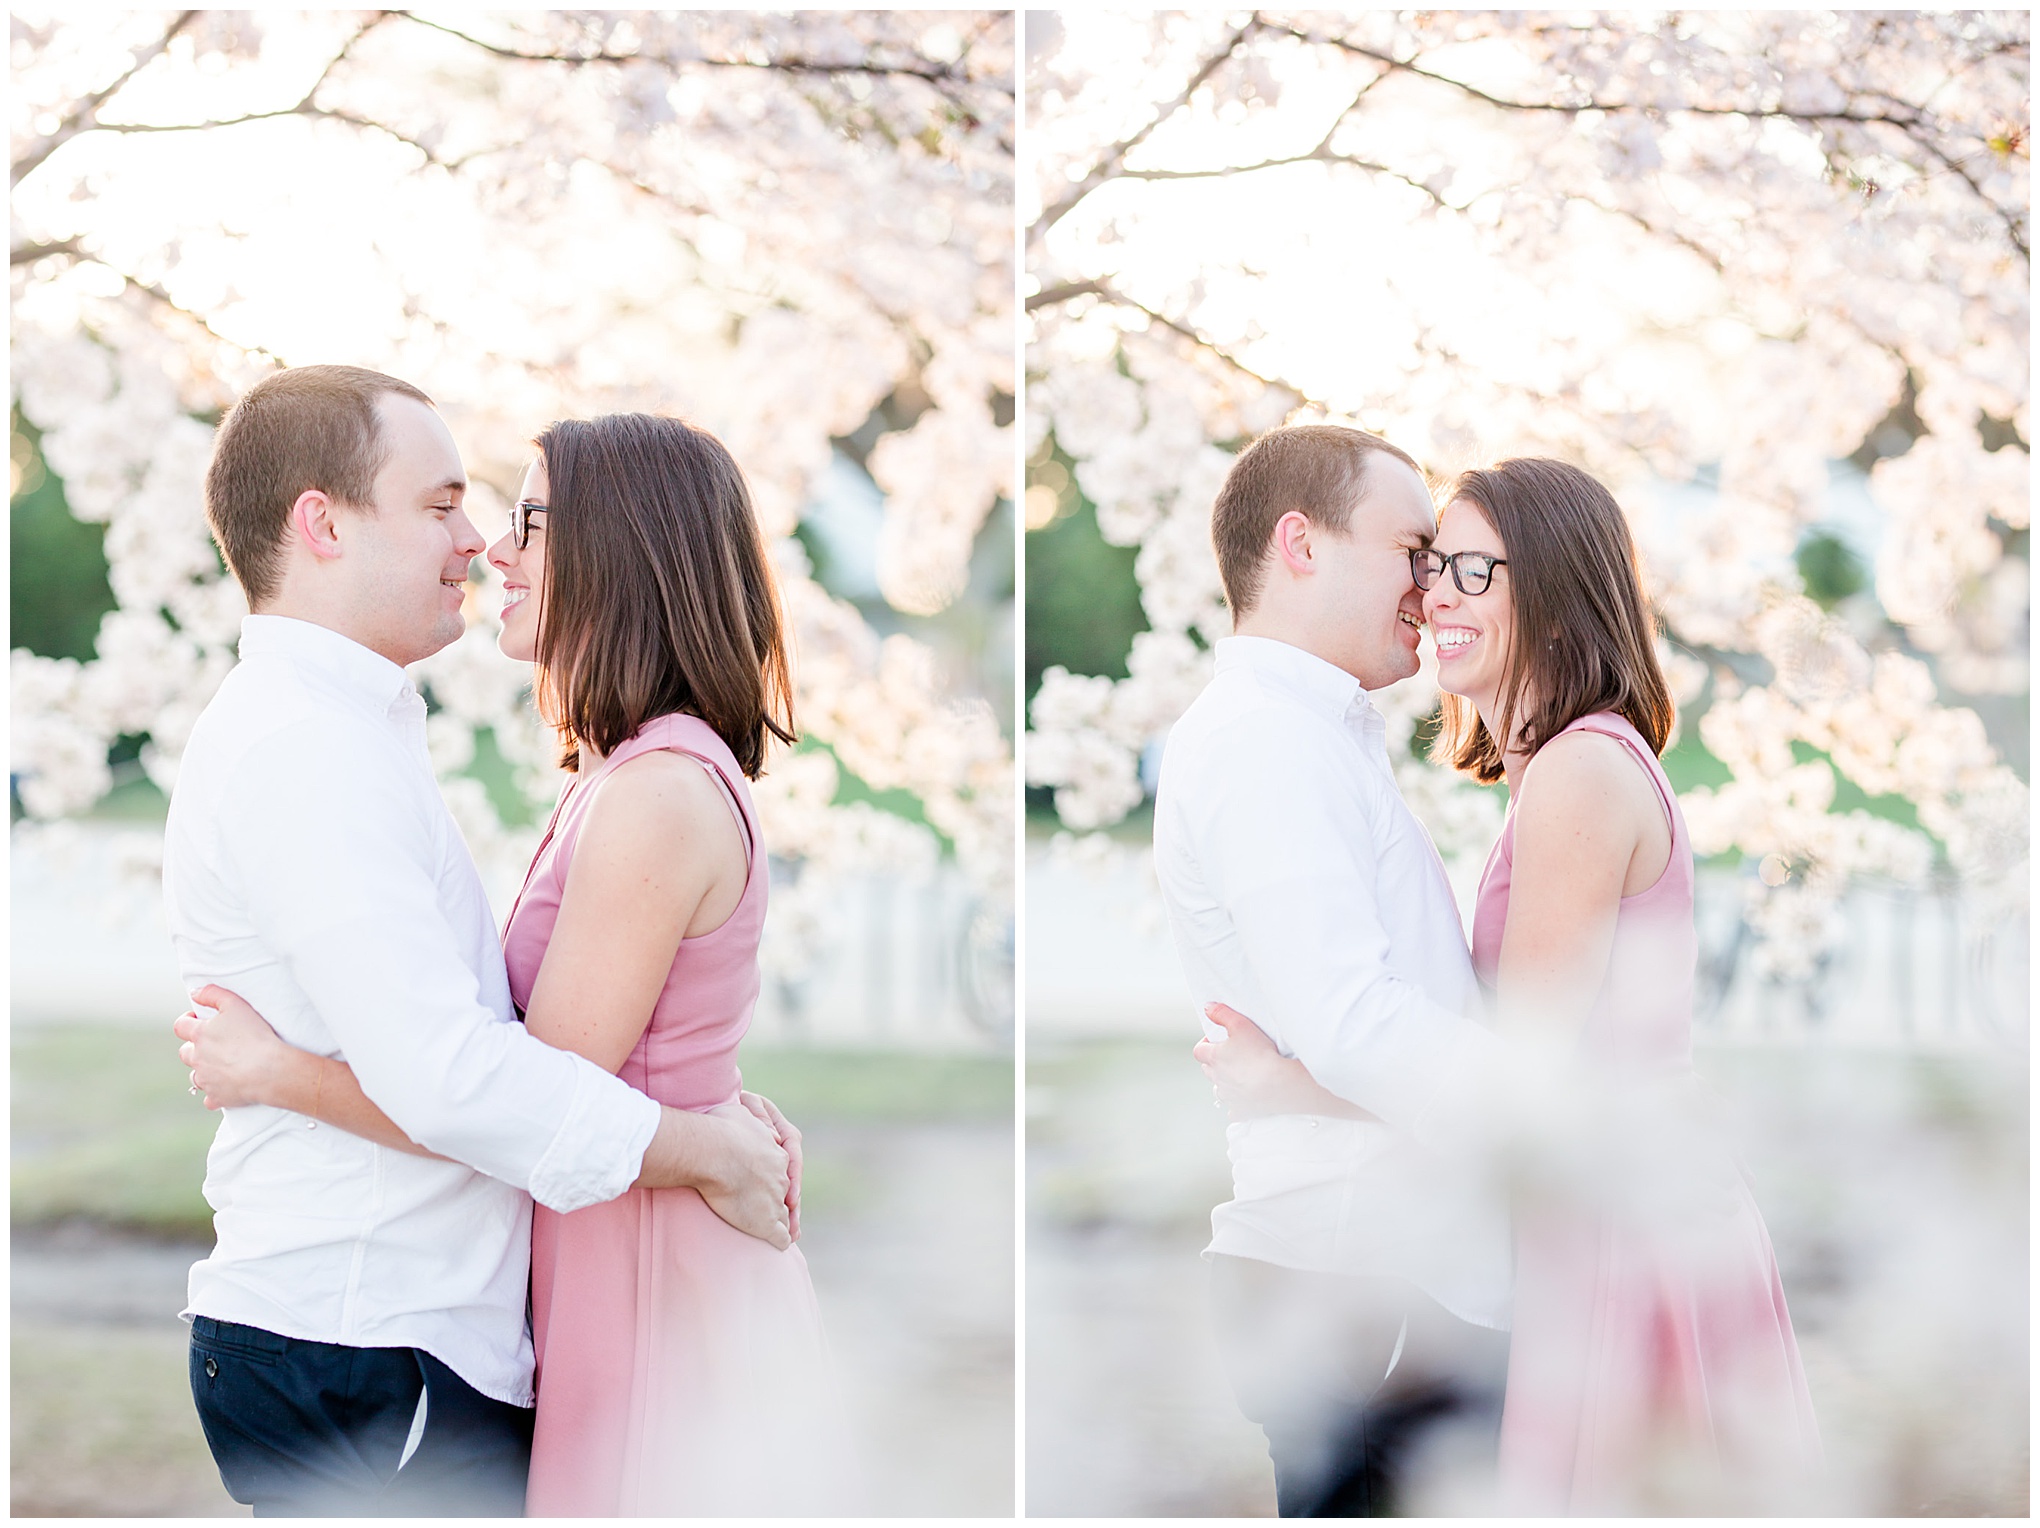 sunny cherry blossoms engagement session, Washington, D.C. engagement photos, Washington D.C. engagement photos, sunrrise engagement photos, cherry blossom engagement photos, D.C. cherry bloossoms, D.C. cherry blossoms photos, cherry blossom photos, cherry blossoms portrraits, sunny engagement photos, classic engagement photos, Rachel E.H. Photography, engagement session style, couple laughing